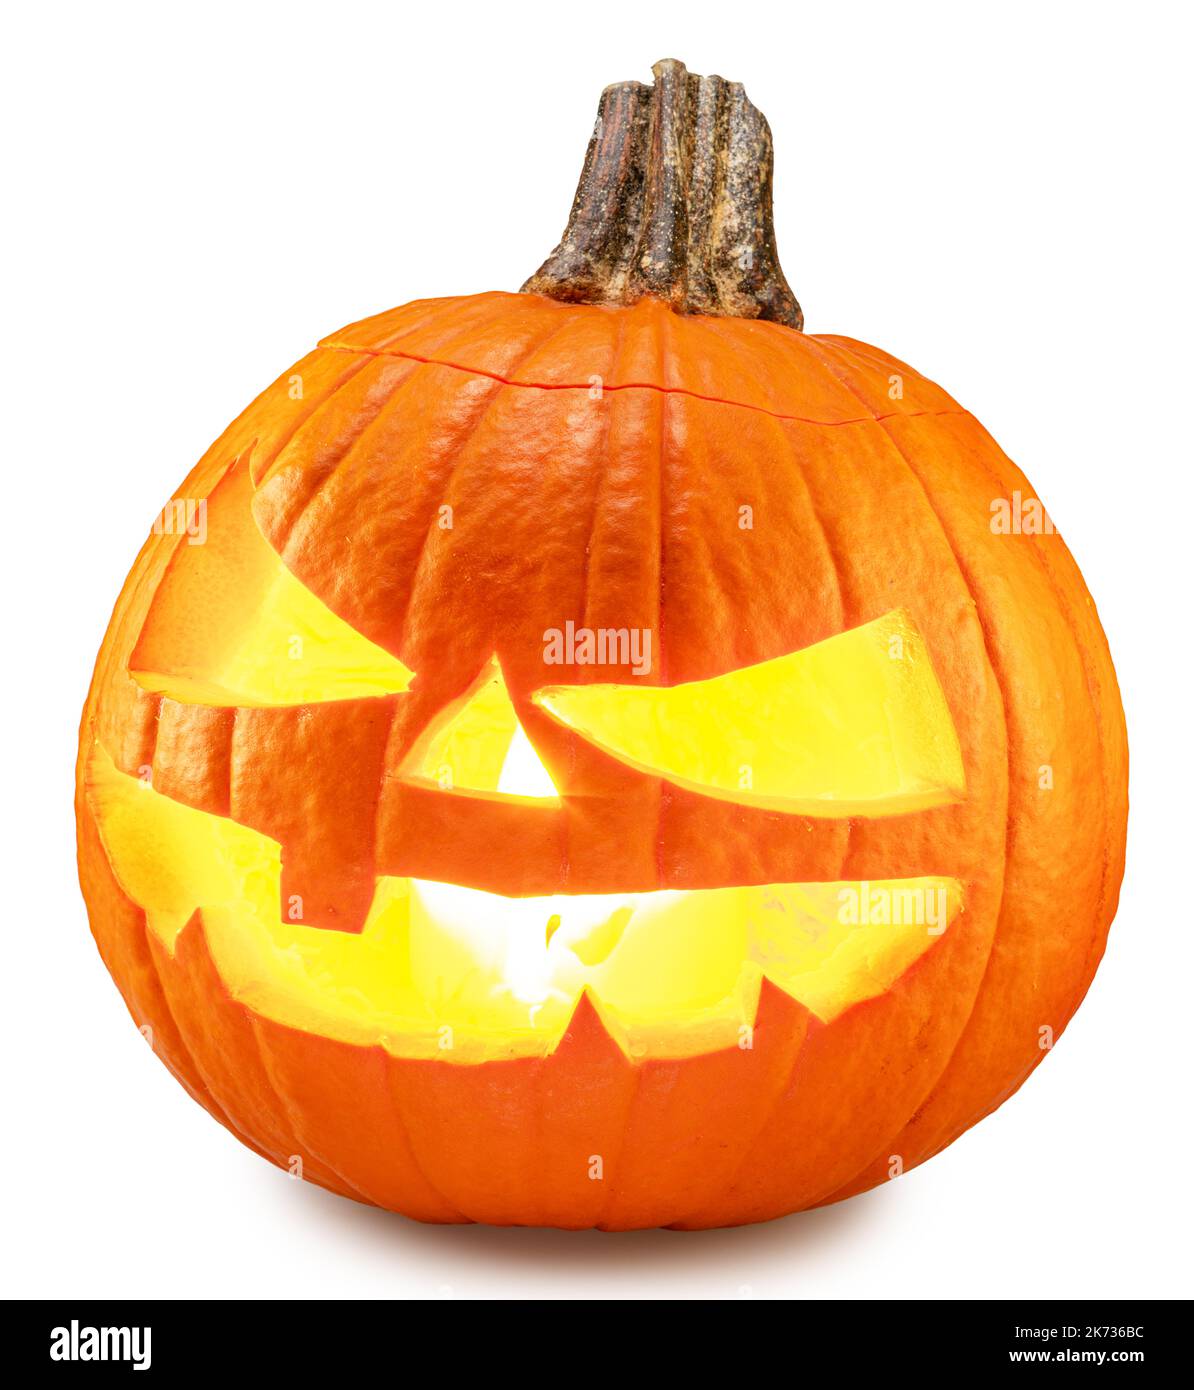 Carved pumpkin for Halloween jack-o'-lanterns with scary smiles and burning candle inside on white background. Clipping path. Stock Photo